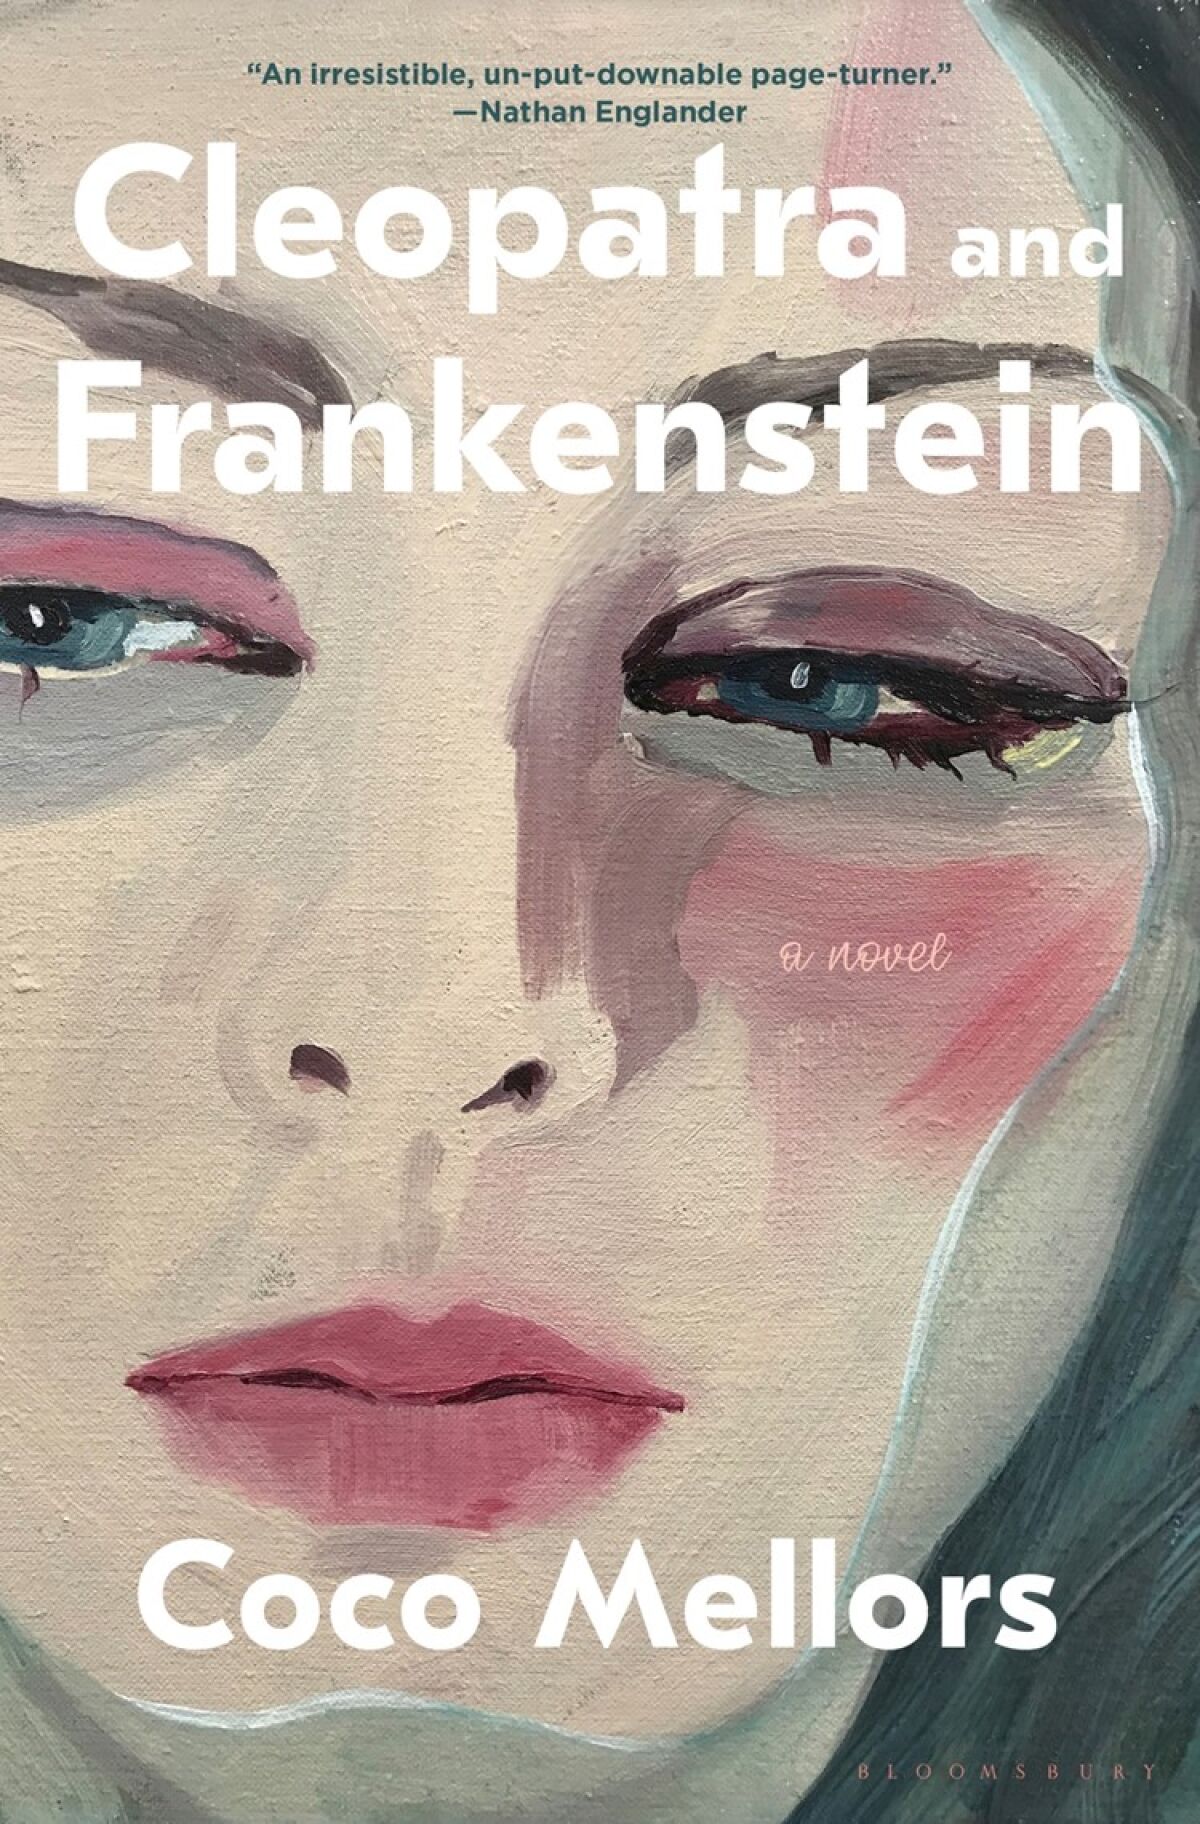 The cover of "Cleopatra and Frankenstein," by Coco Mellors